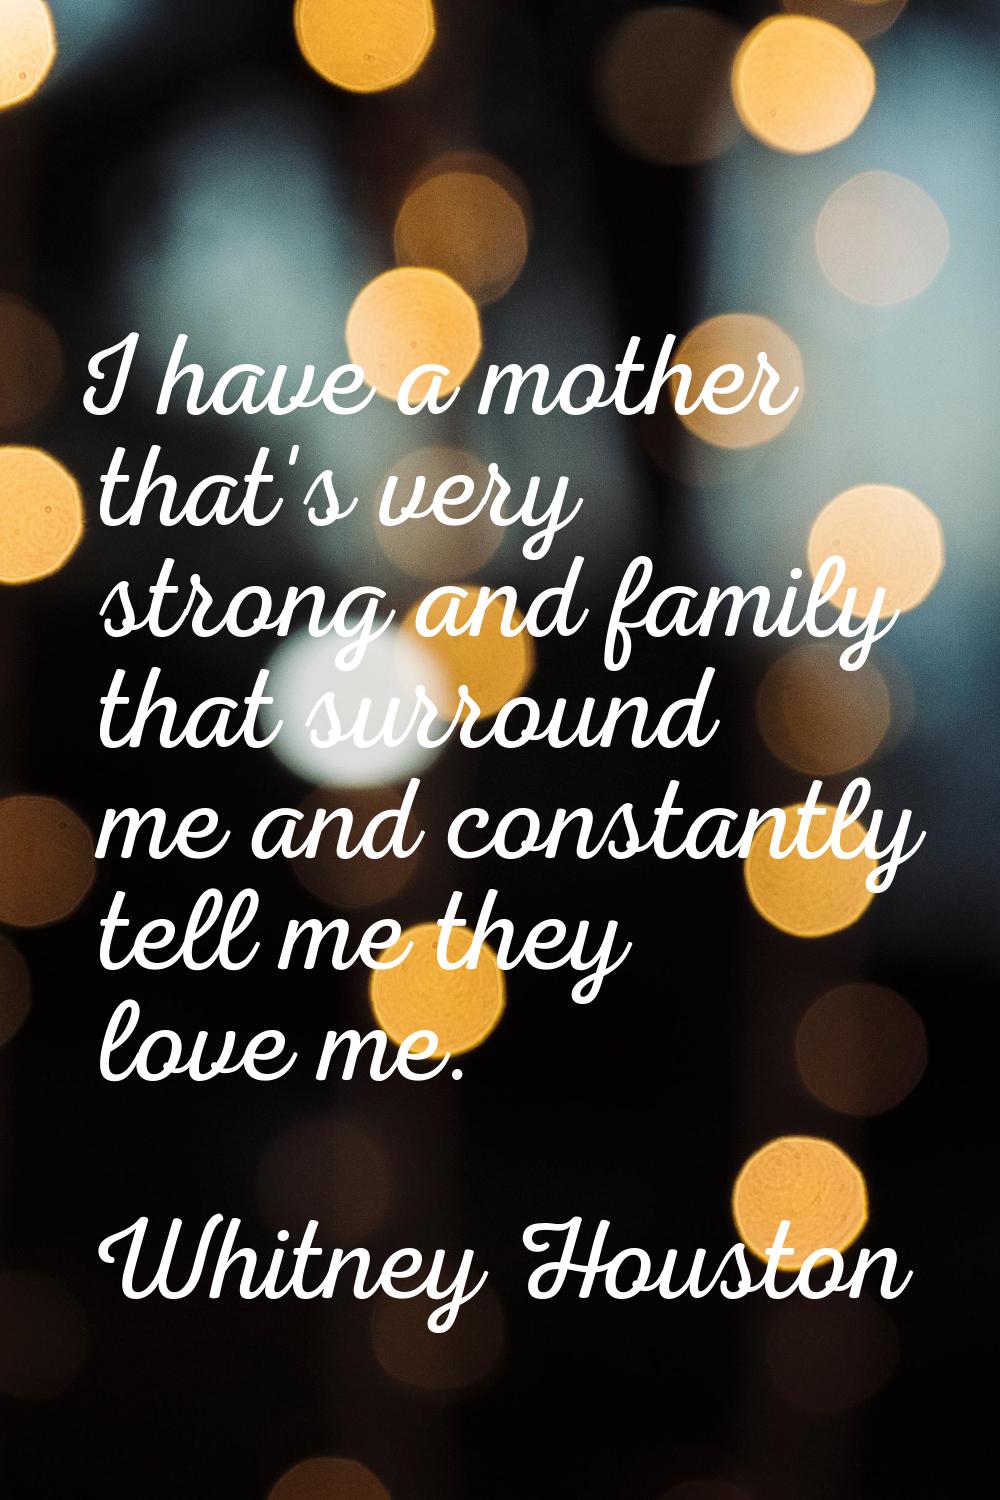 I have a mother that's very strong and family that surround me and constantly tell me they love me.